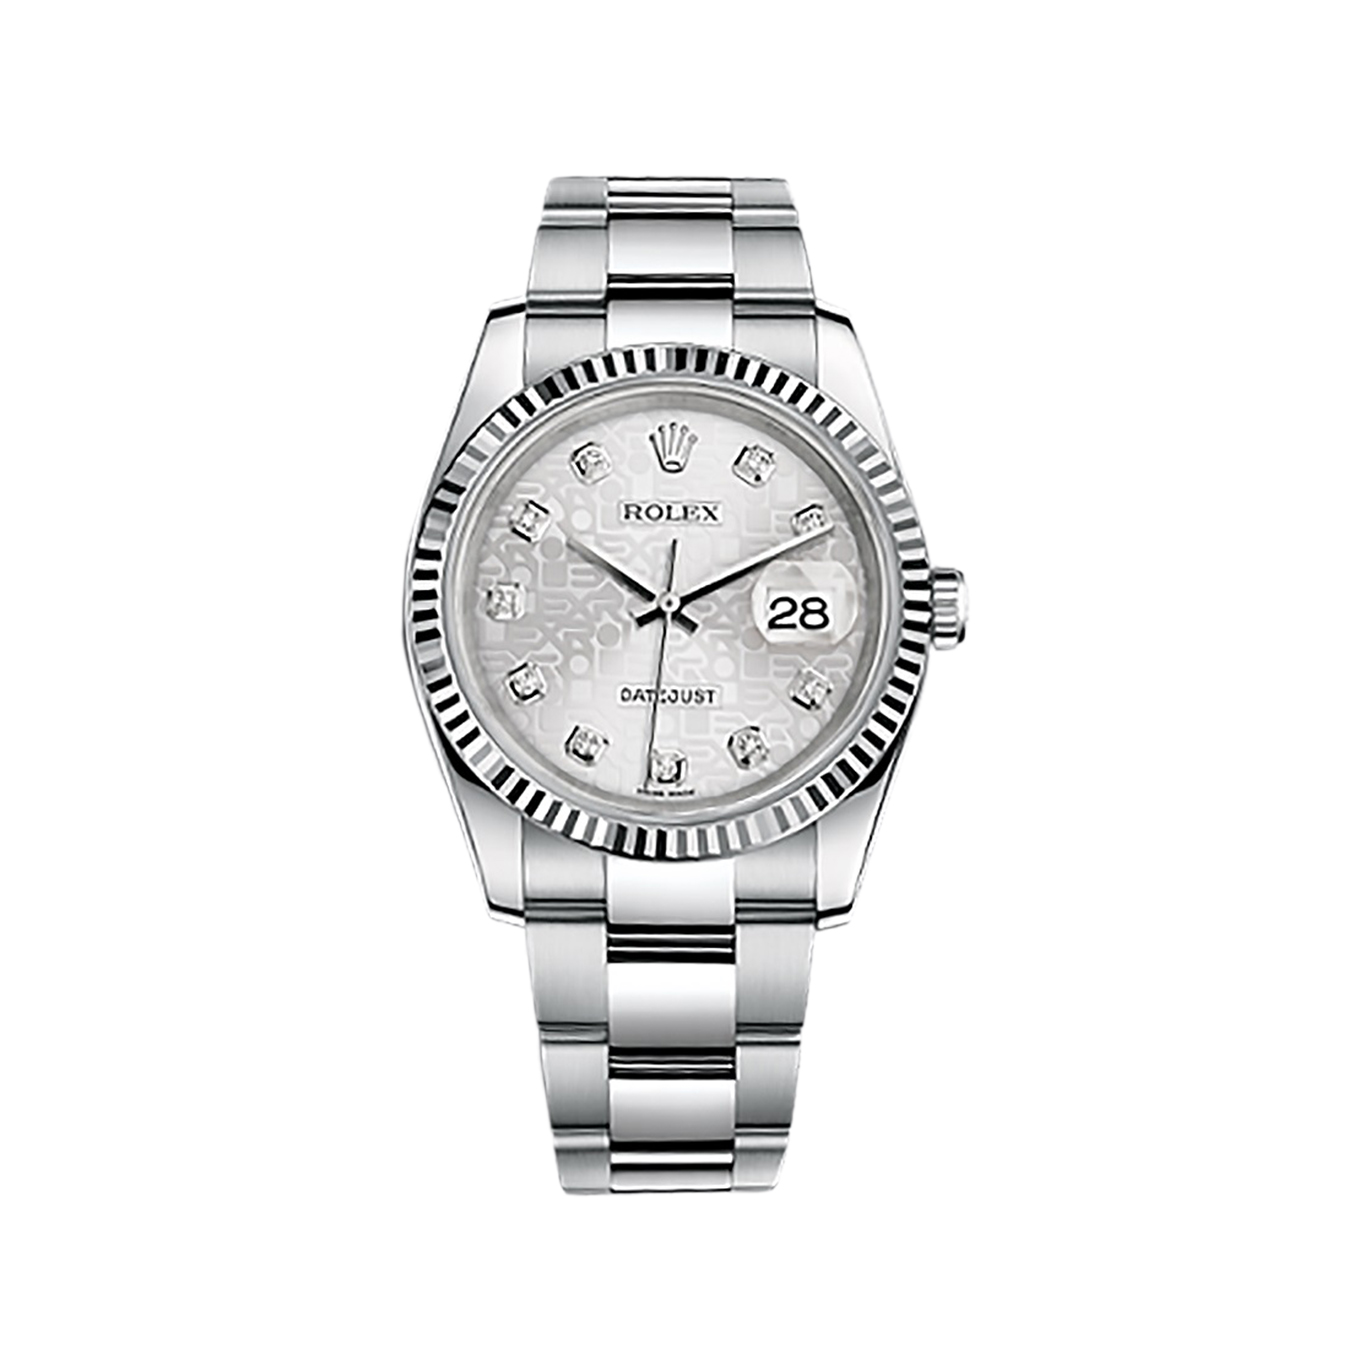 Datejust 36 116234 White Gold & Stainless Steel Watch (Silver Jubilee Design Set with Diamonds)